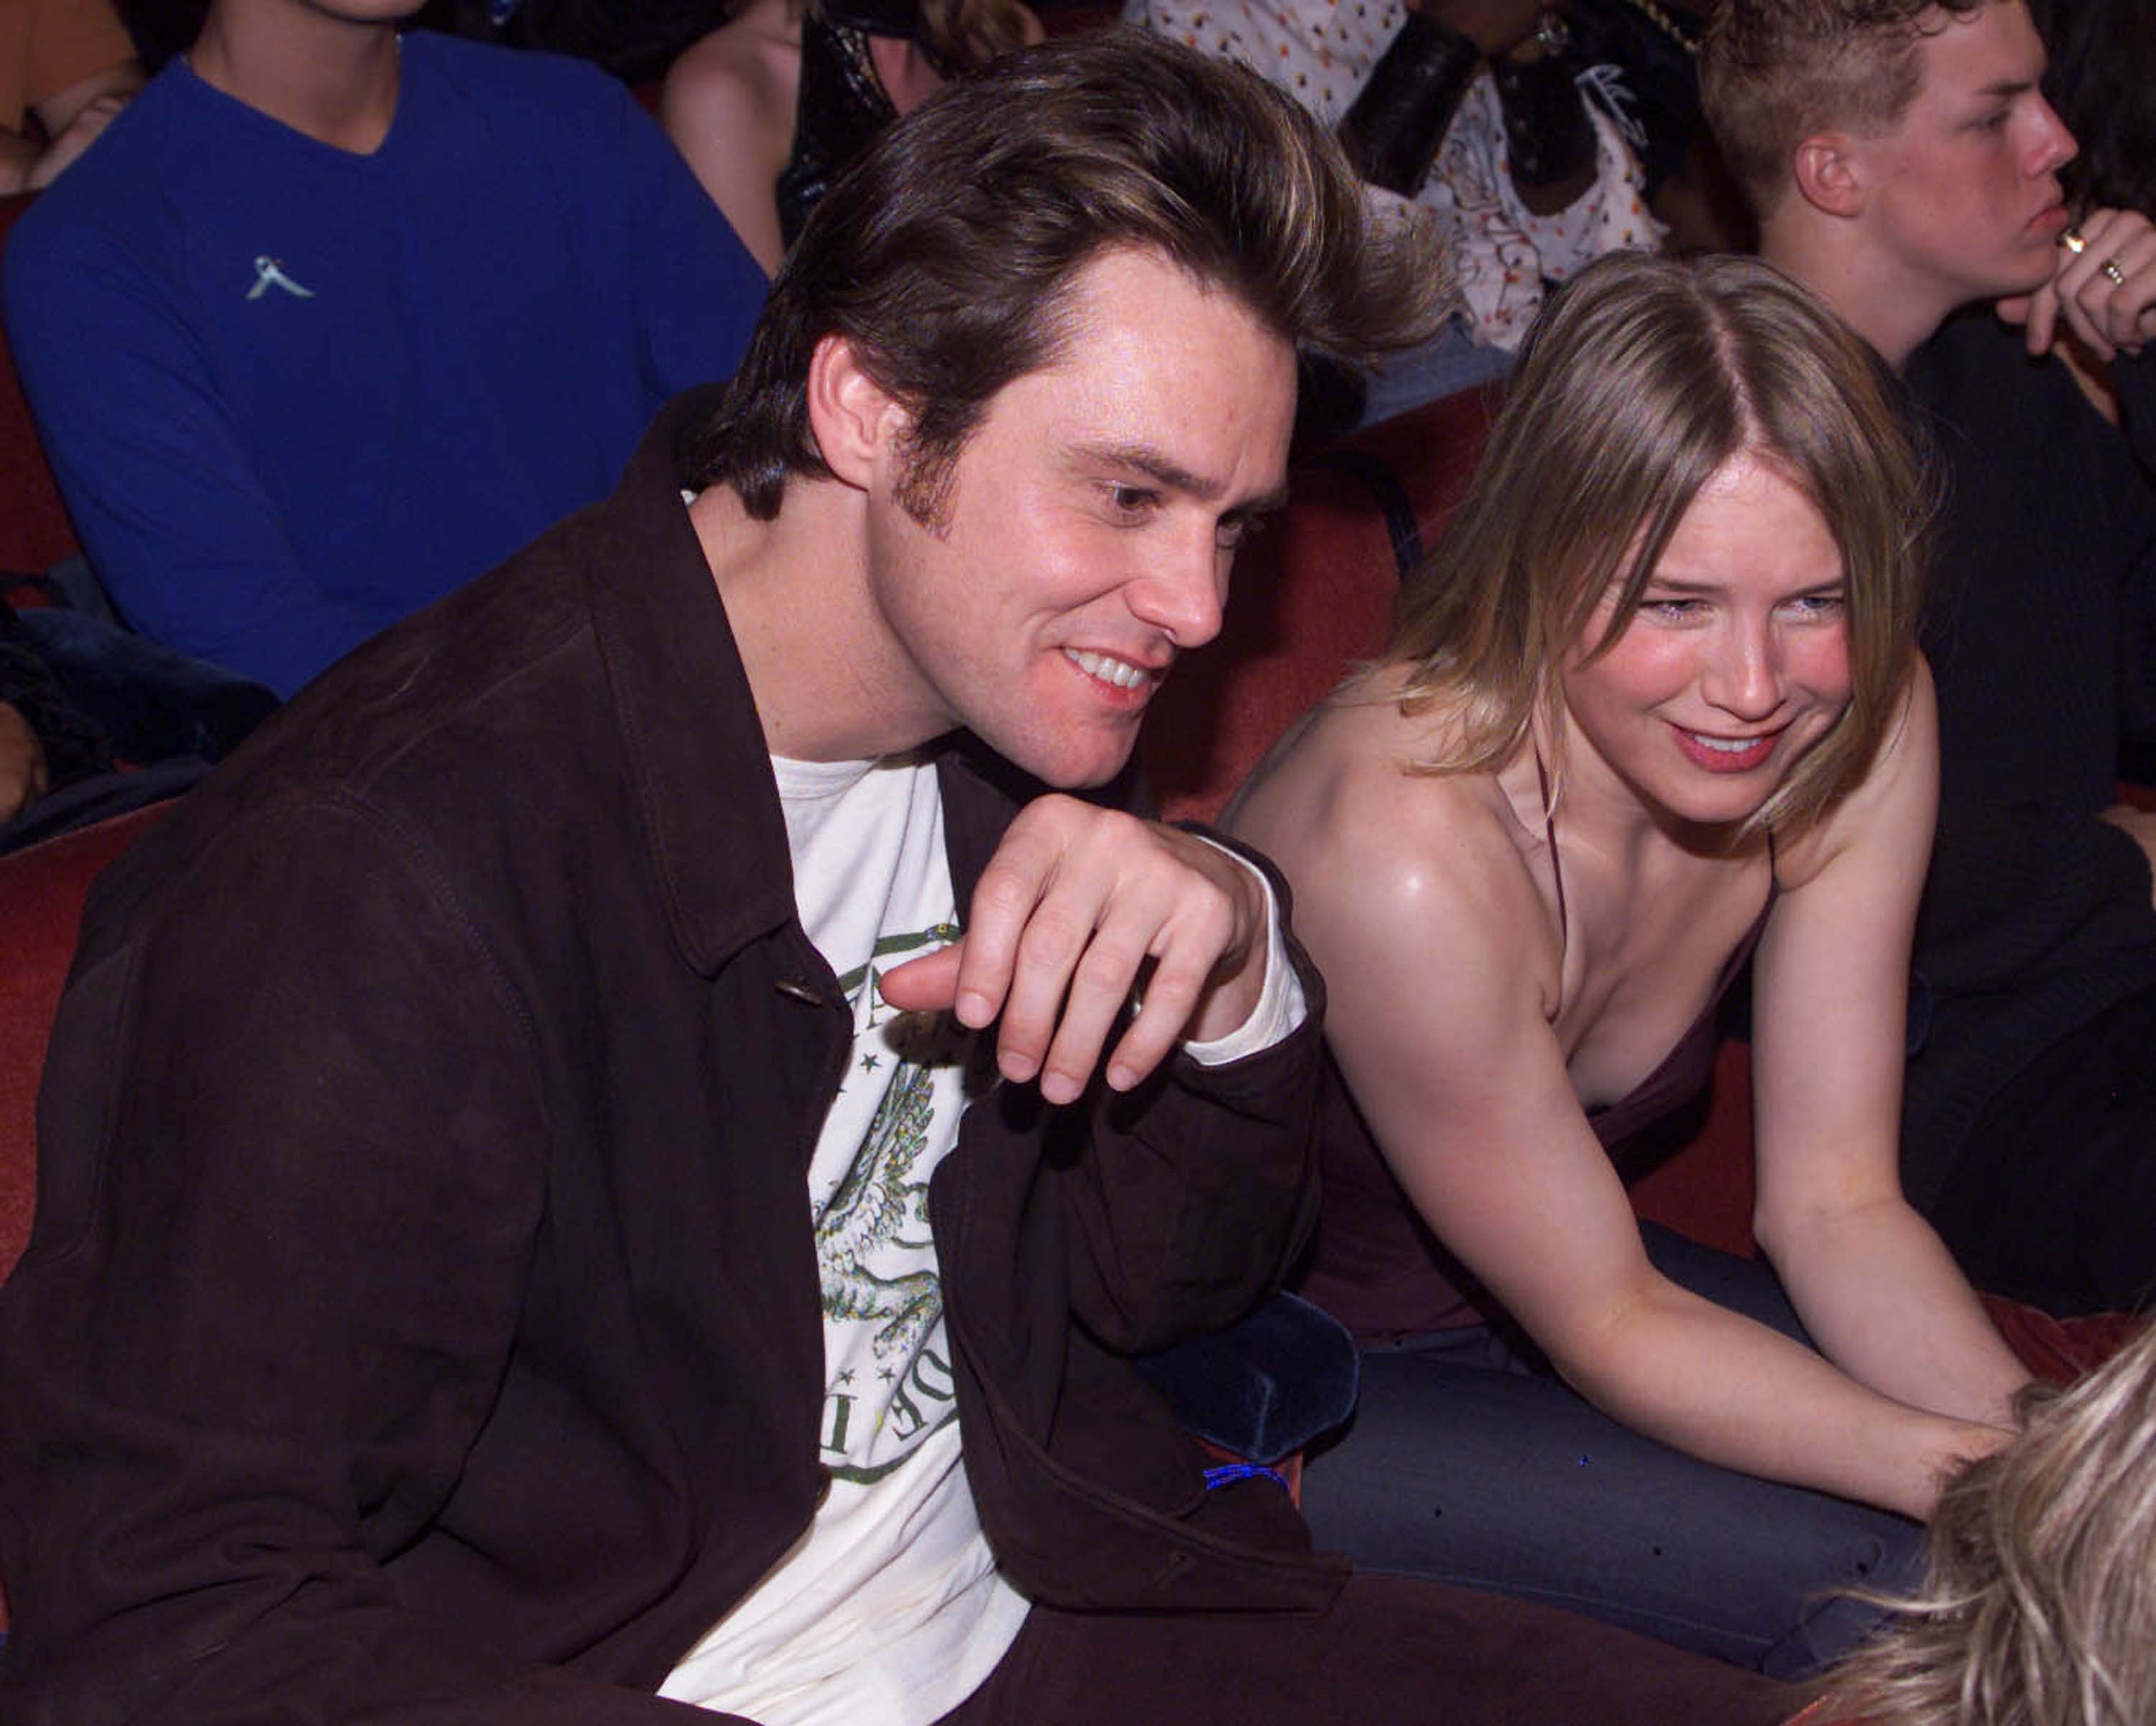 Jim Carrey and Renee Zellweger at the MTV Music Video Awards in 2000